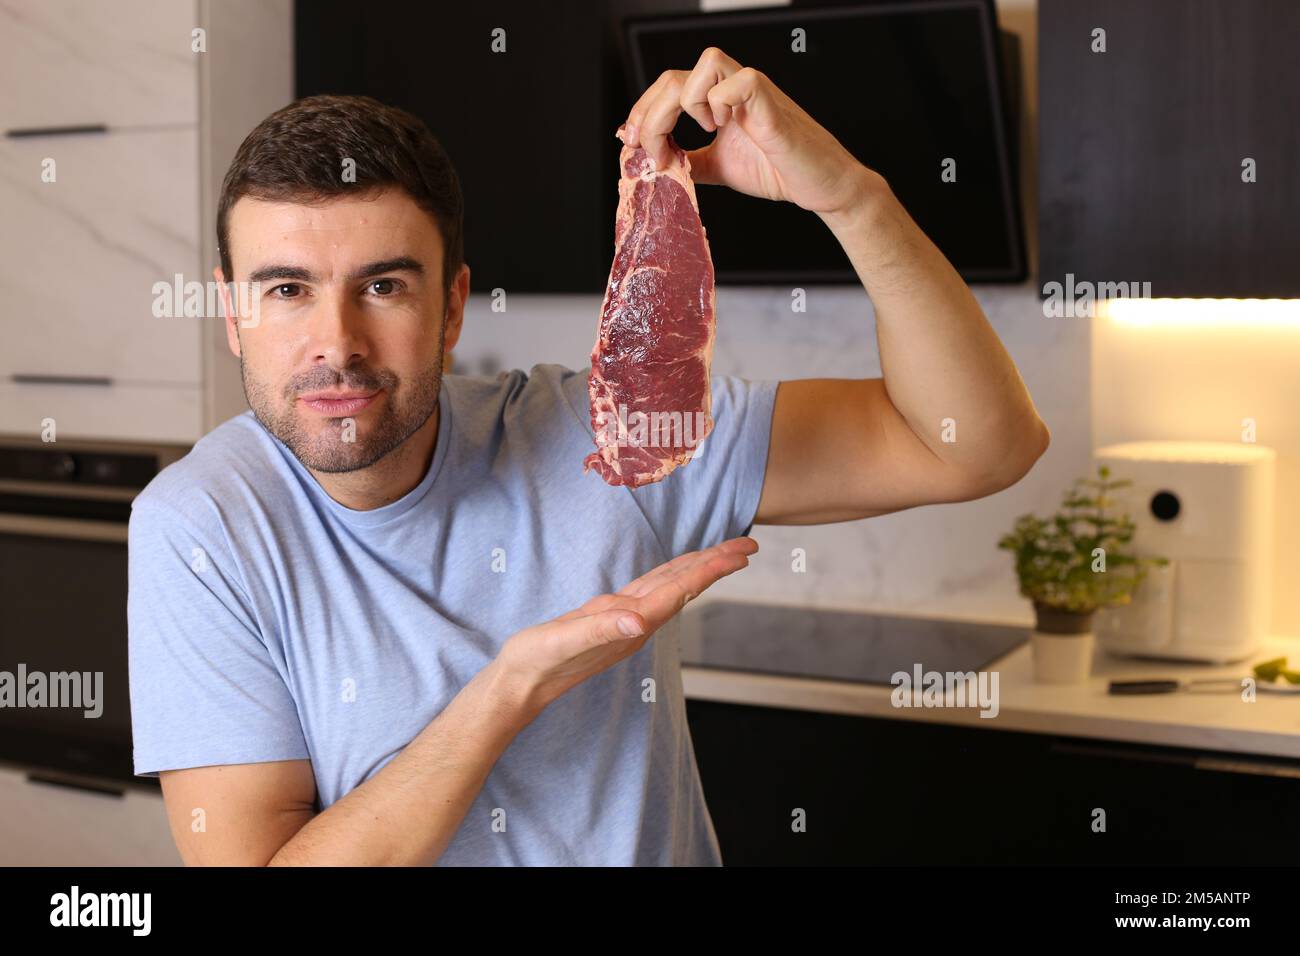 Meat lover showing a delicious raw steak Stock Photo